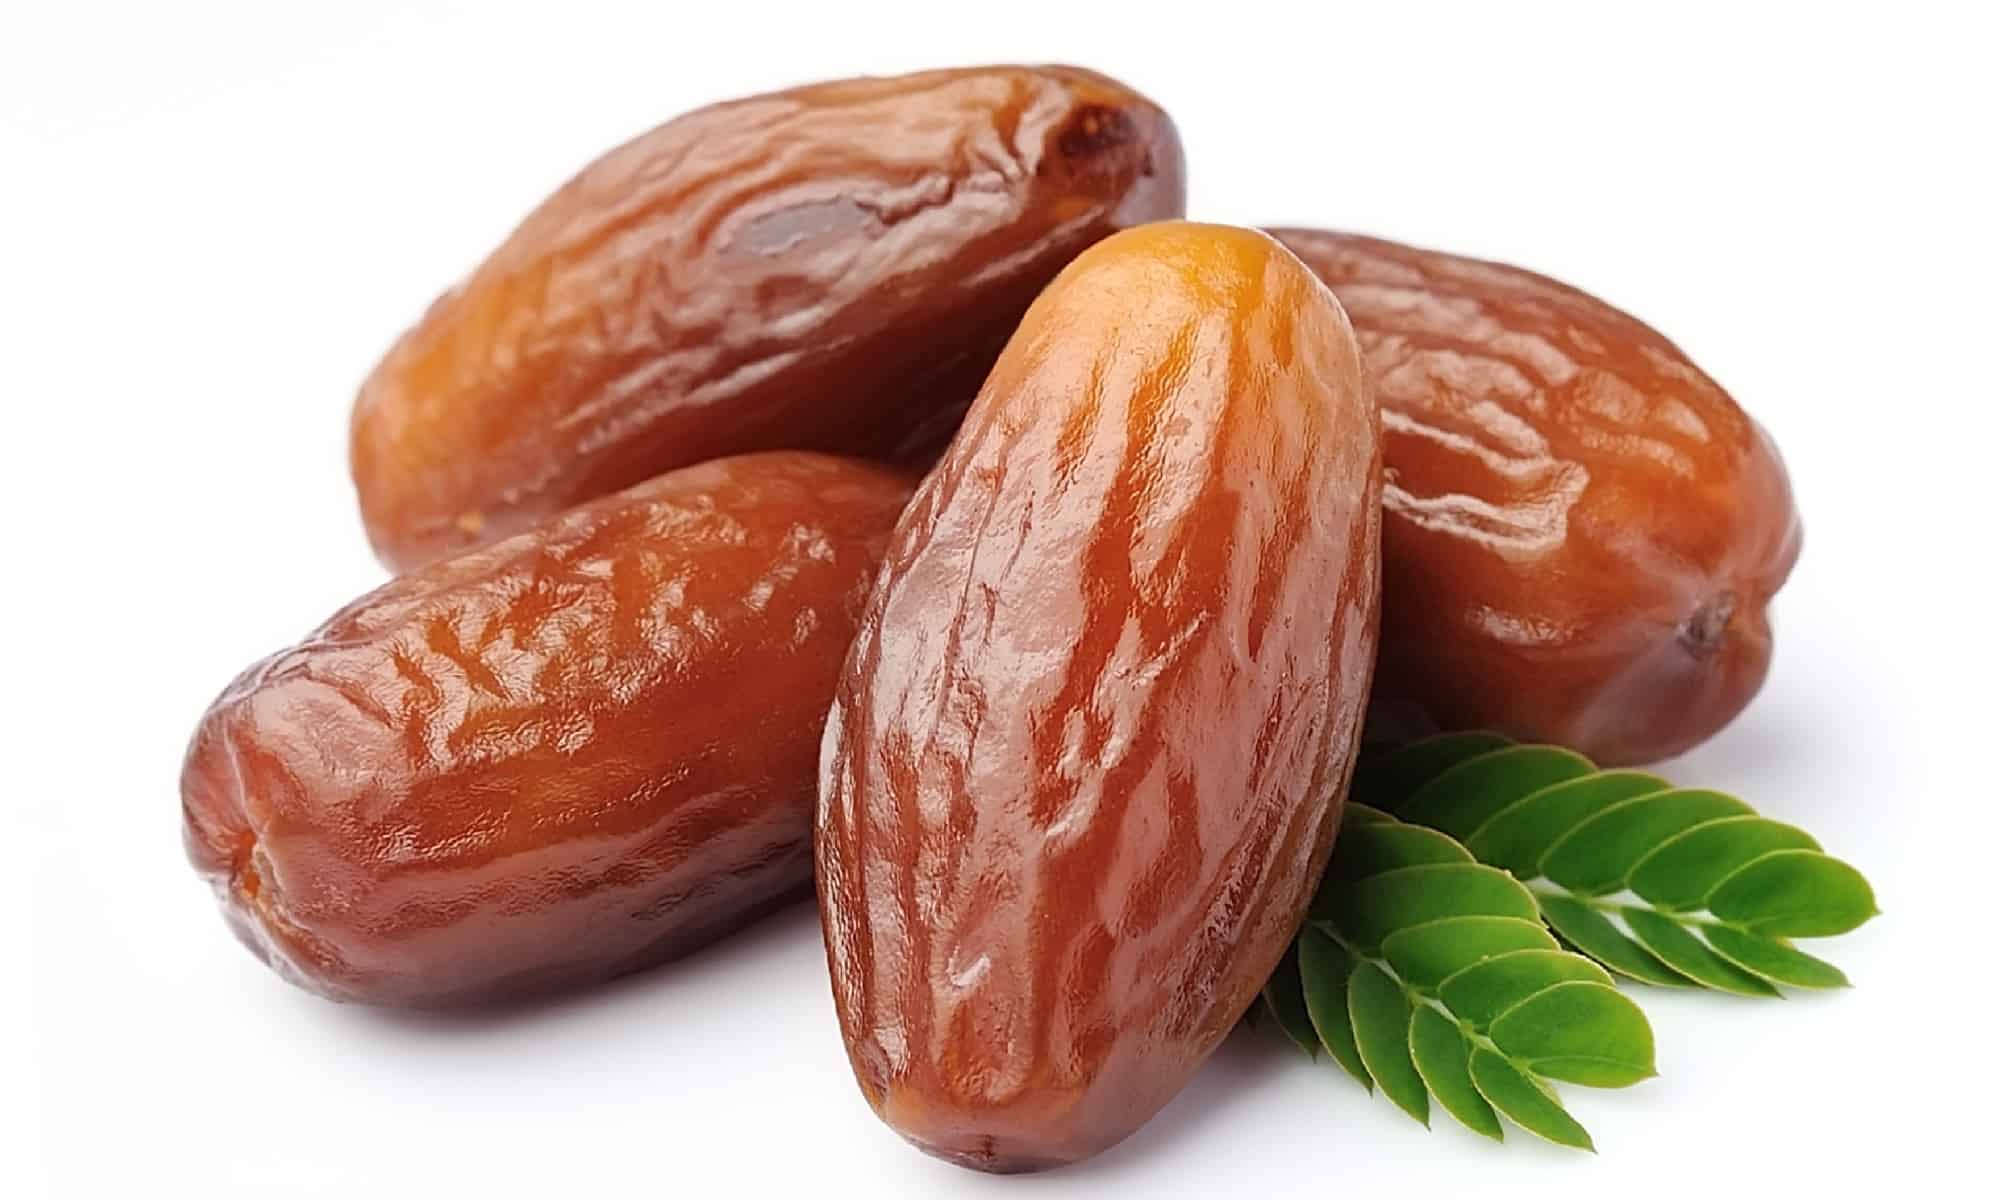 Where Do Dates Fruit Come From? 